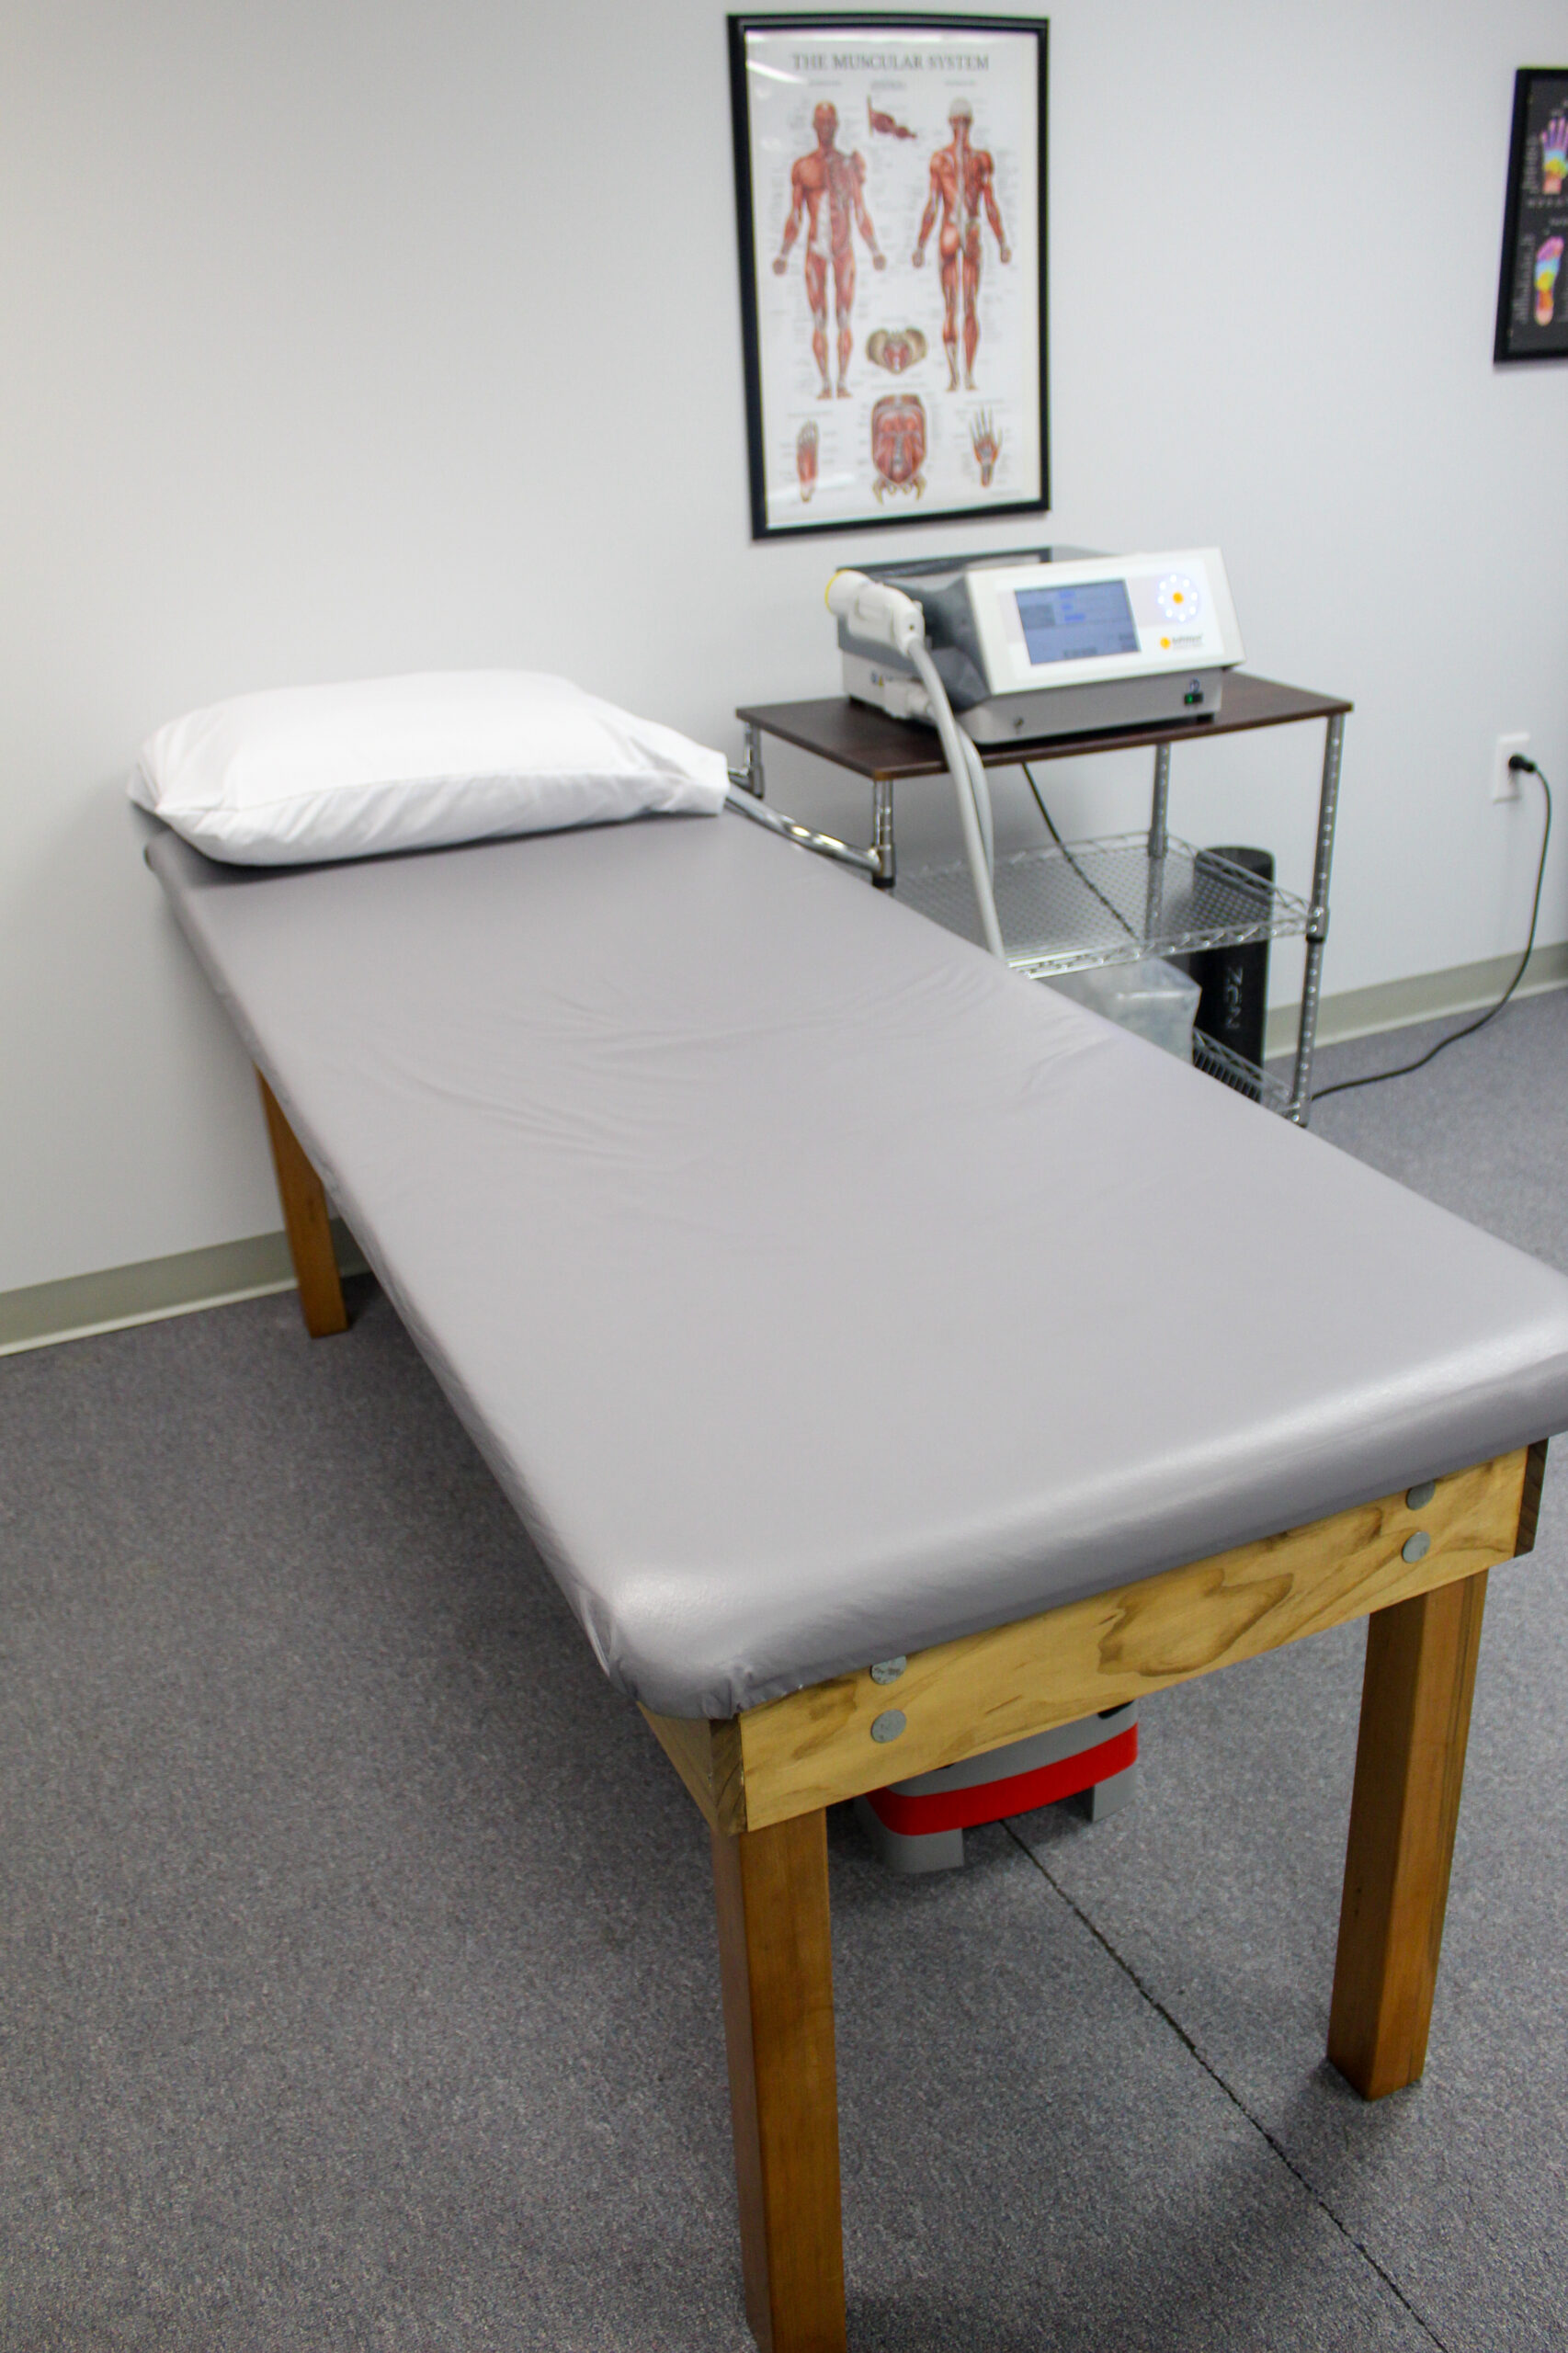 Picture of a grey physical therapy table.